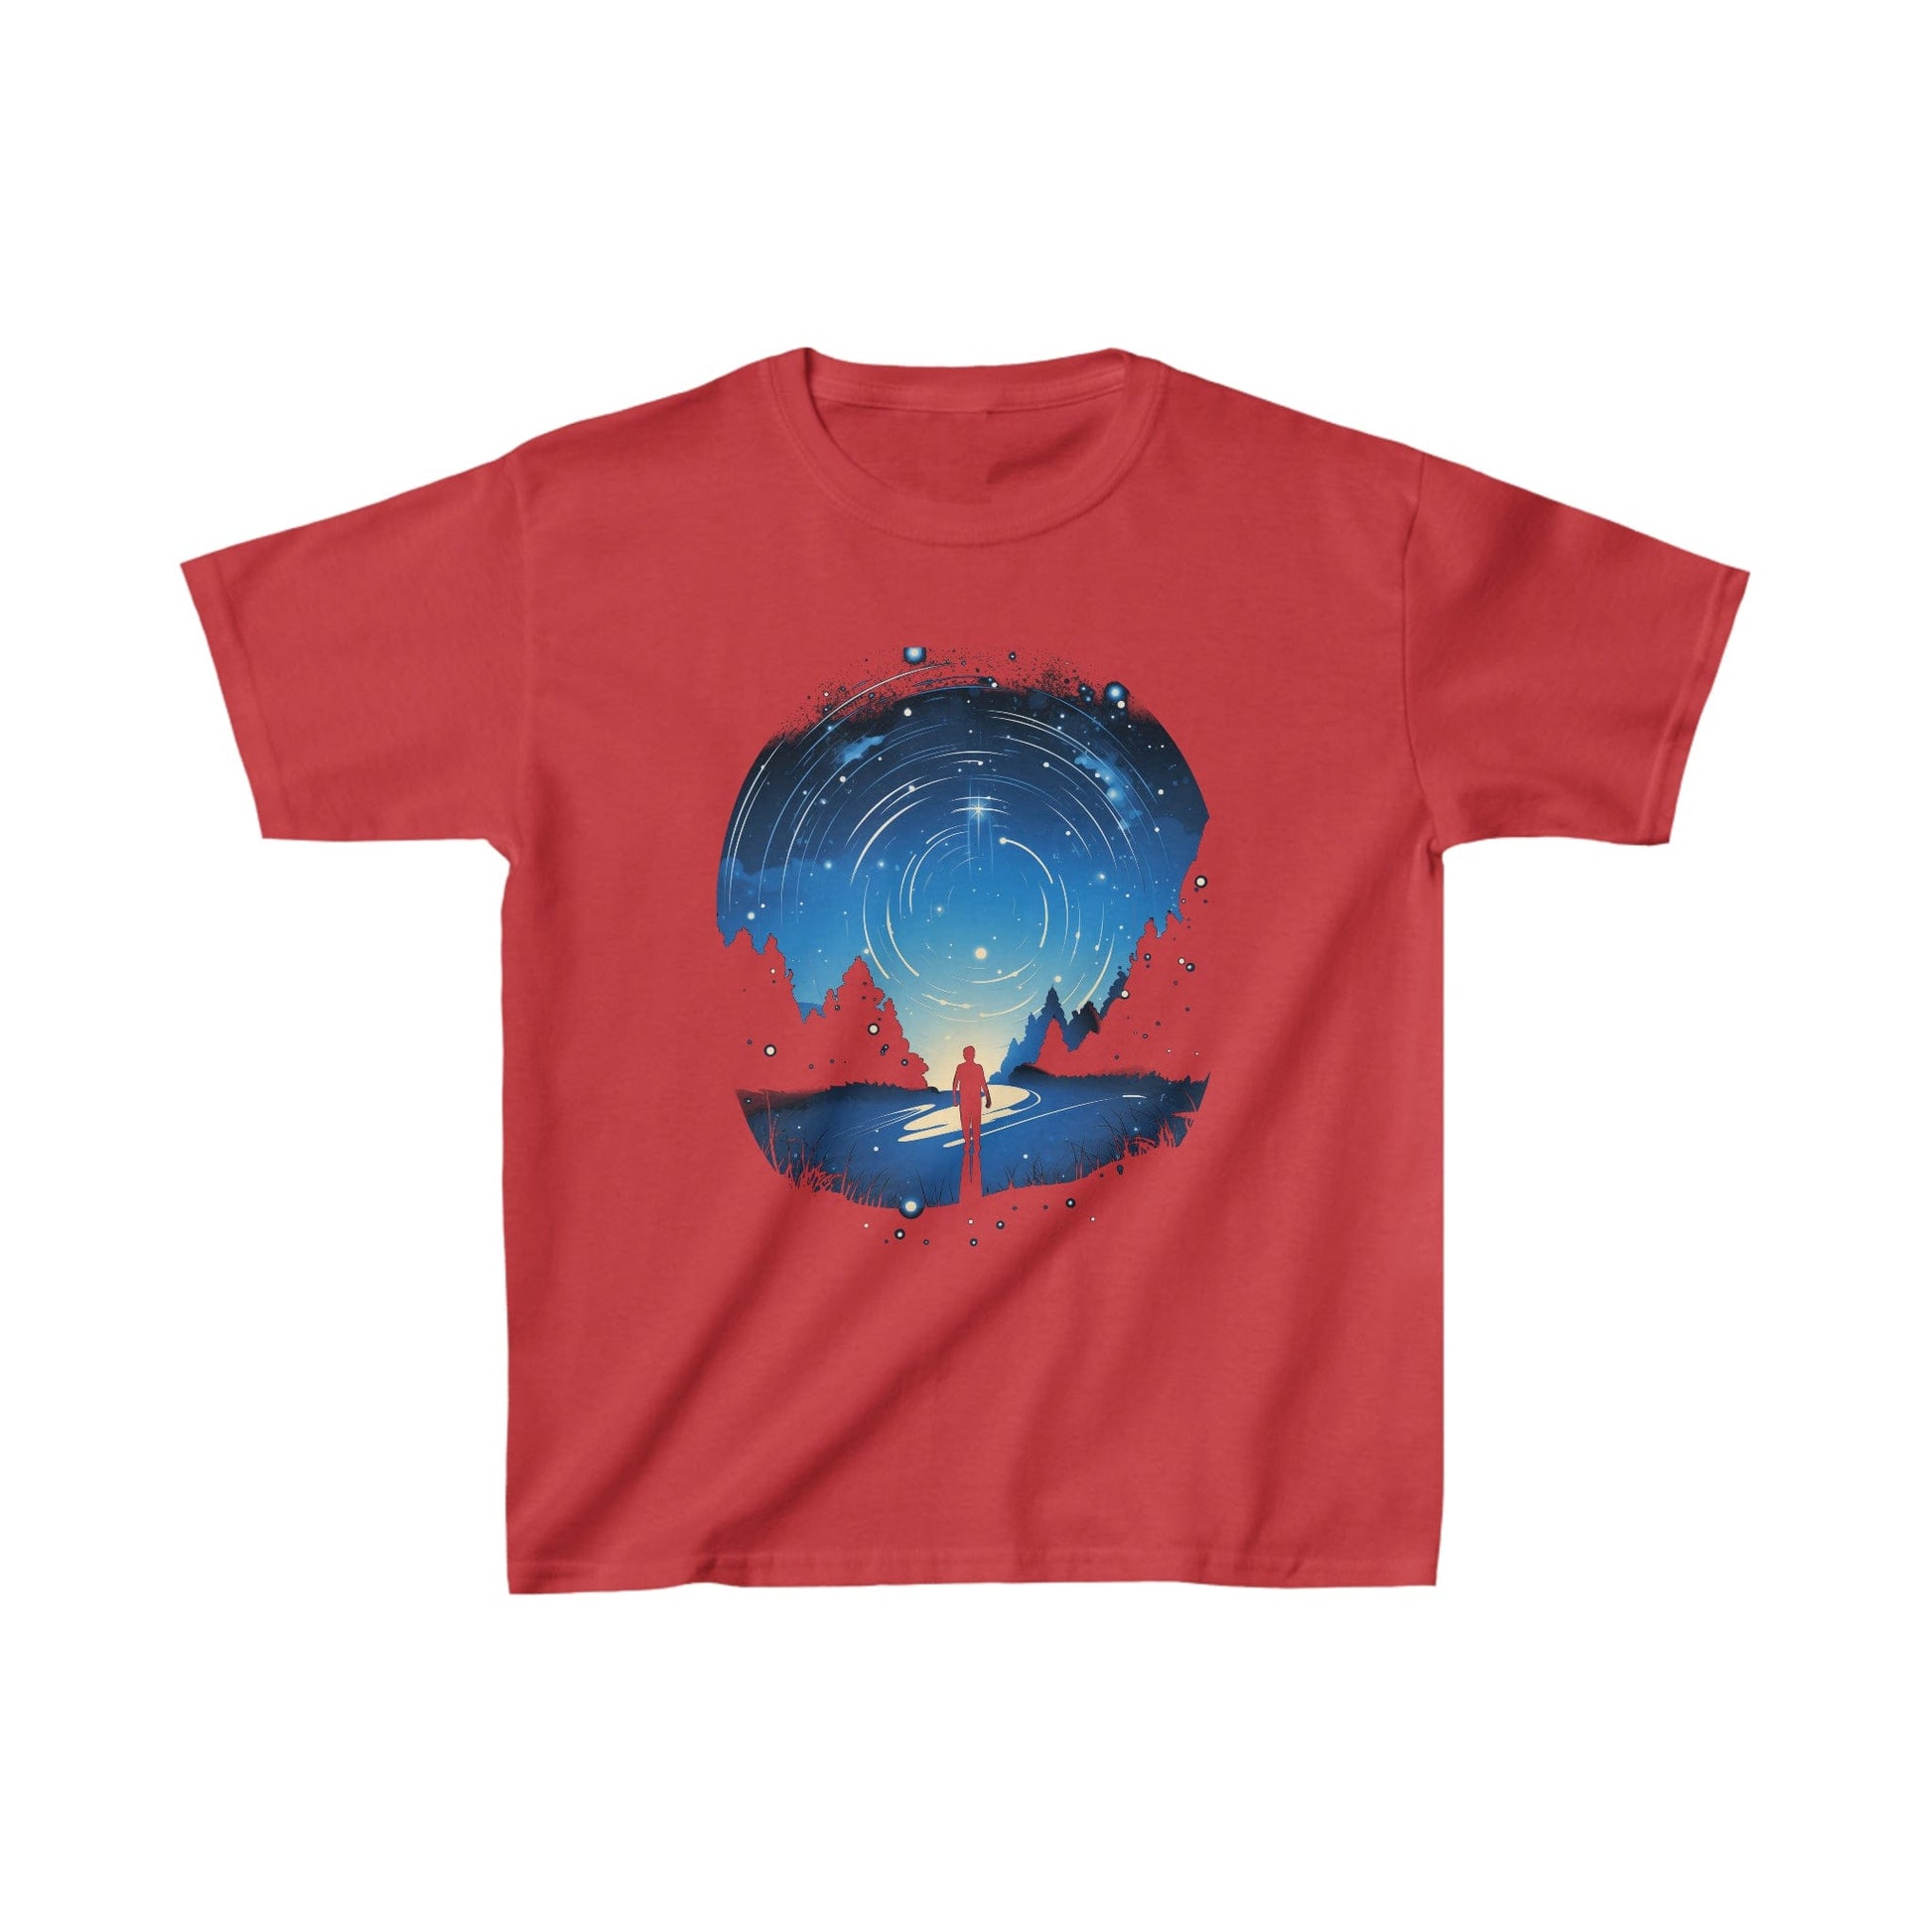 Kids clothes XS / Red Youth Cosmic Swirl: Explorer Gazing at the Night Sky T-Shirt